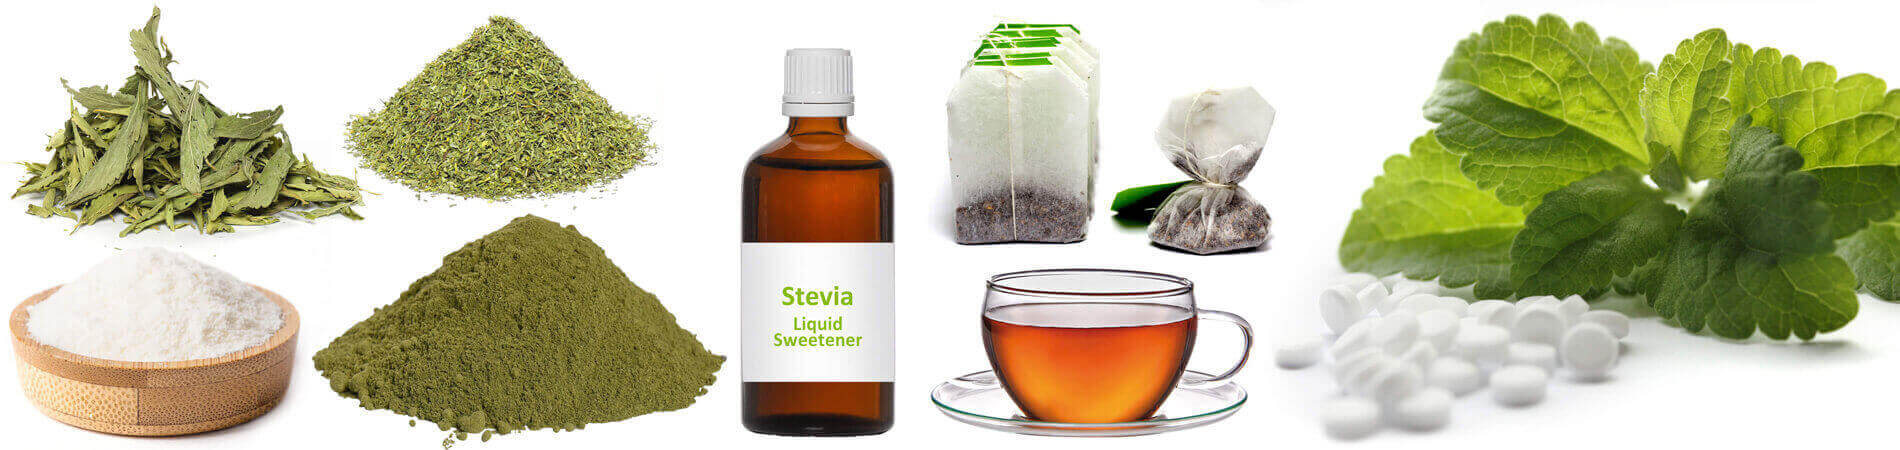 Stevia as a sweetener - All about the sugar substitute 